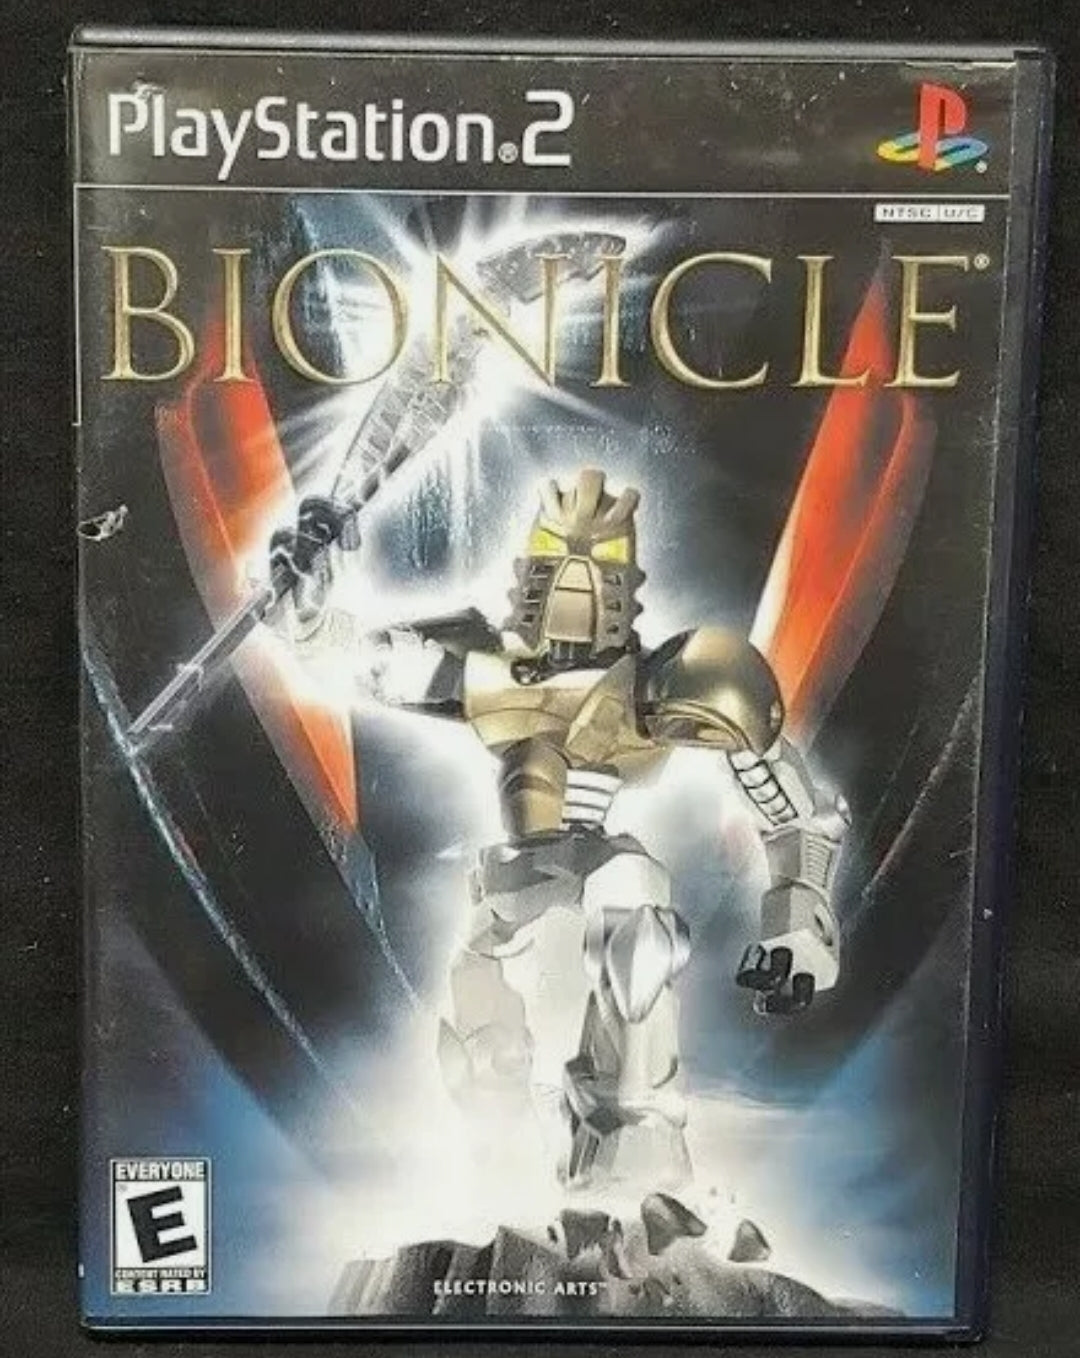 Bionicle *PS2 Playstation 2  Game Disc Plays Great!!